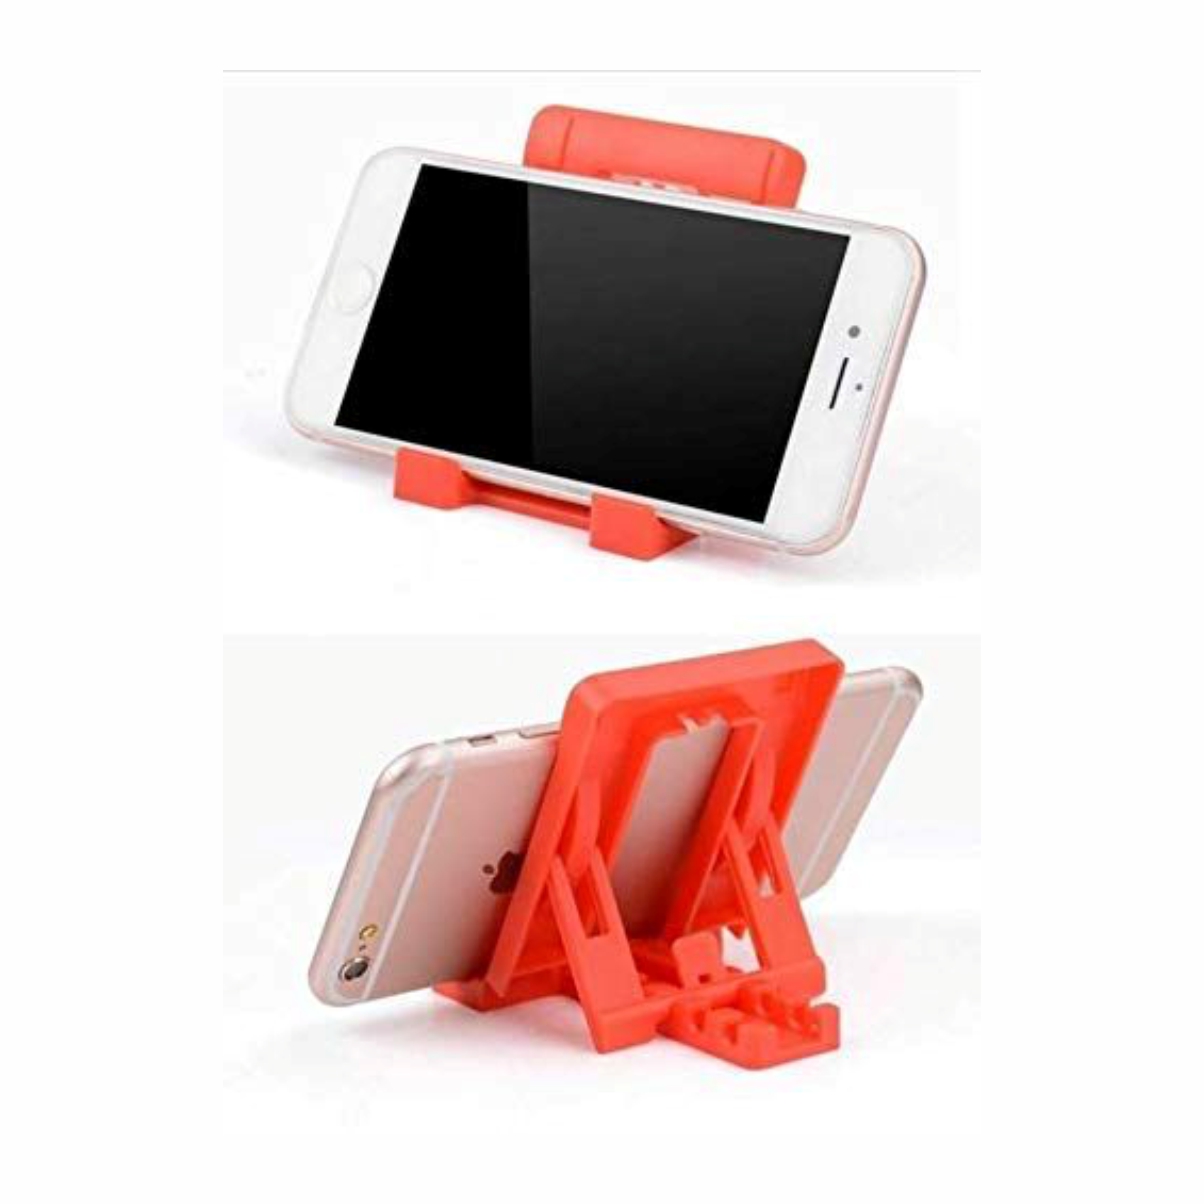 Flexible and Adjustable Jio Mobile Stand for Table, Bed, Video Shooting, YouTube Recording, Zoom, Online Class, Office.